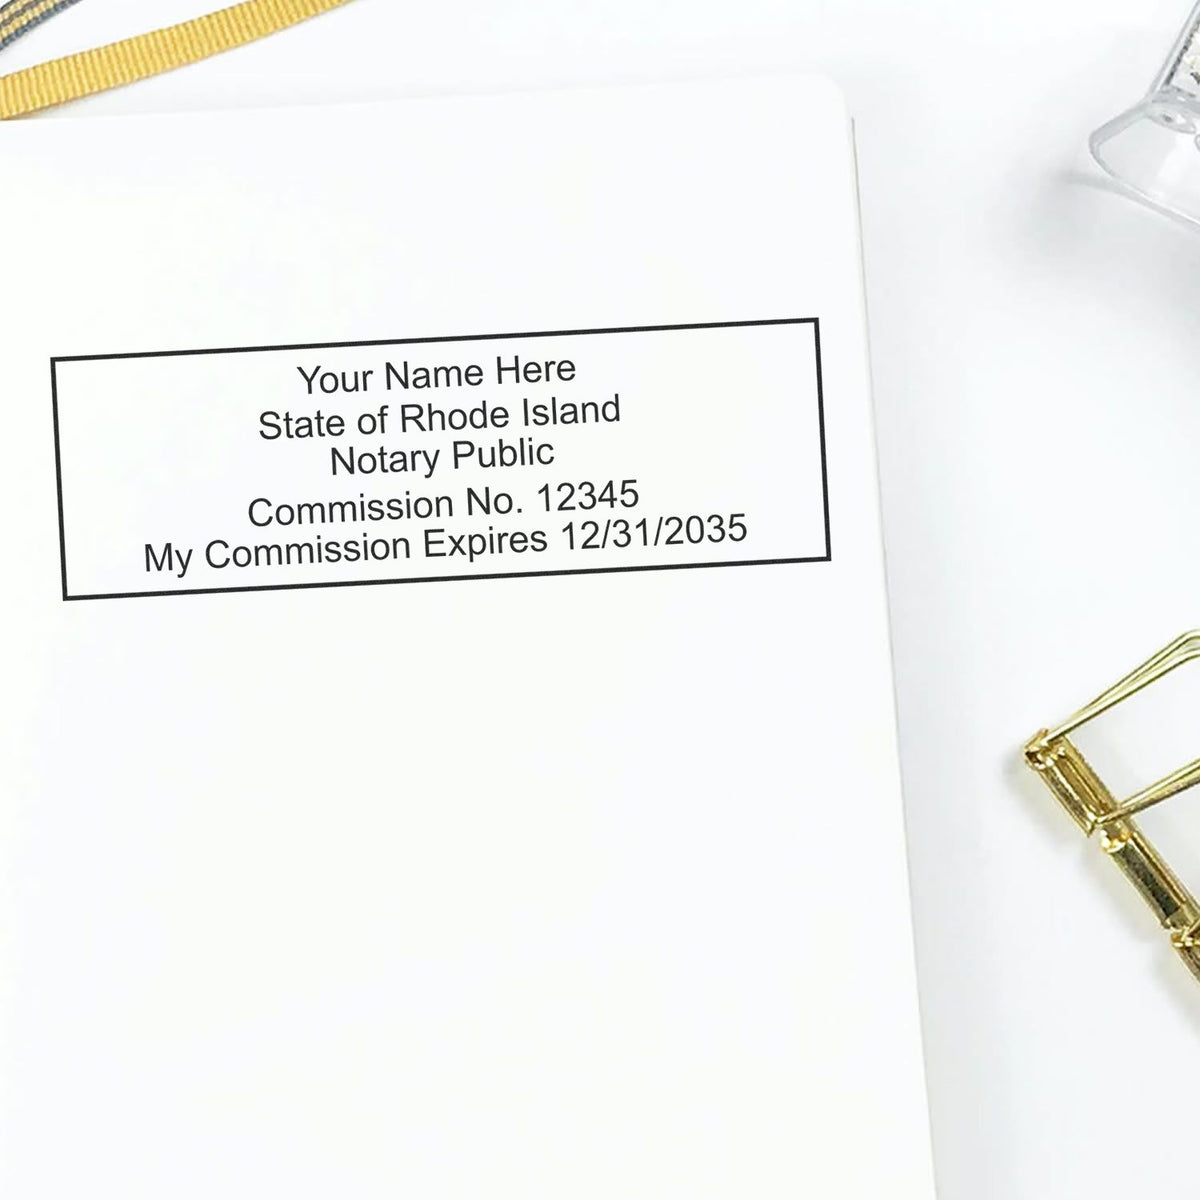 This paper is stamped with a sample imprint of the Super Slim Rhode Island Notary Public Stamp, signifying its quality and reliability.